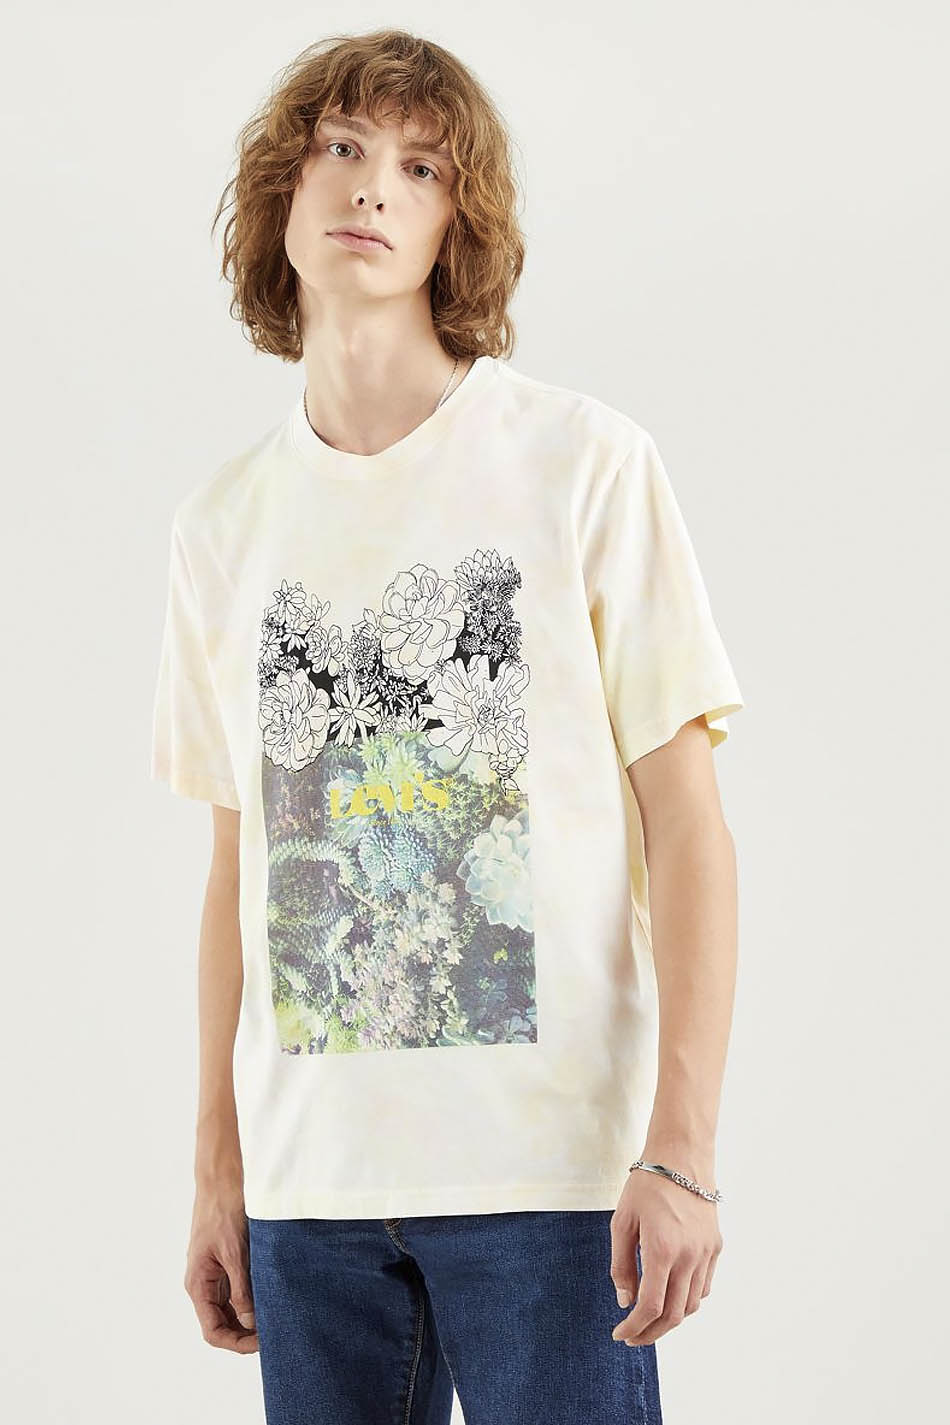 Levi's Relaxed Fit Floral T-shirt